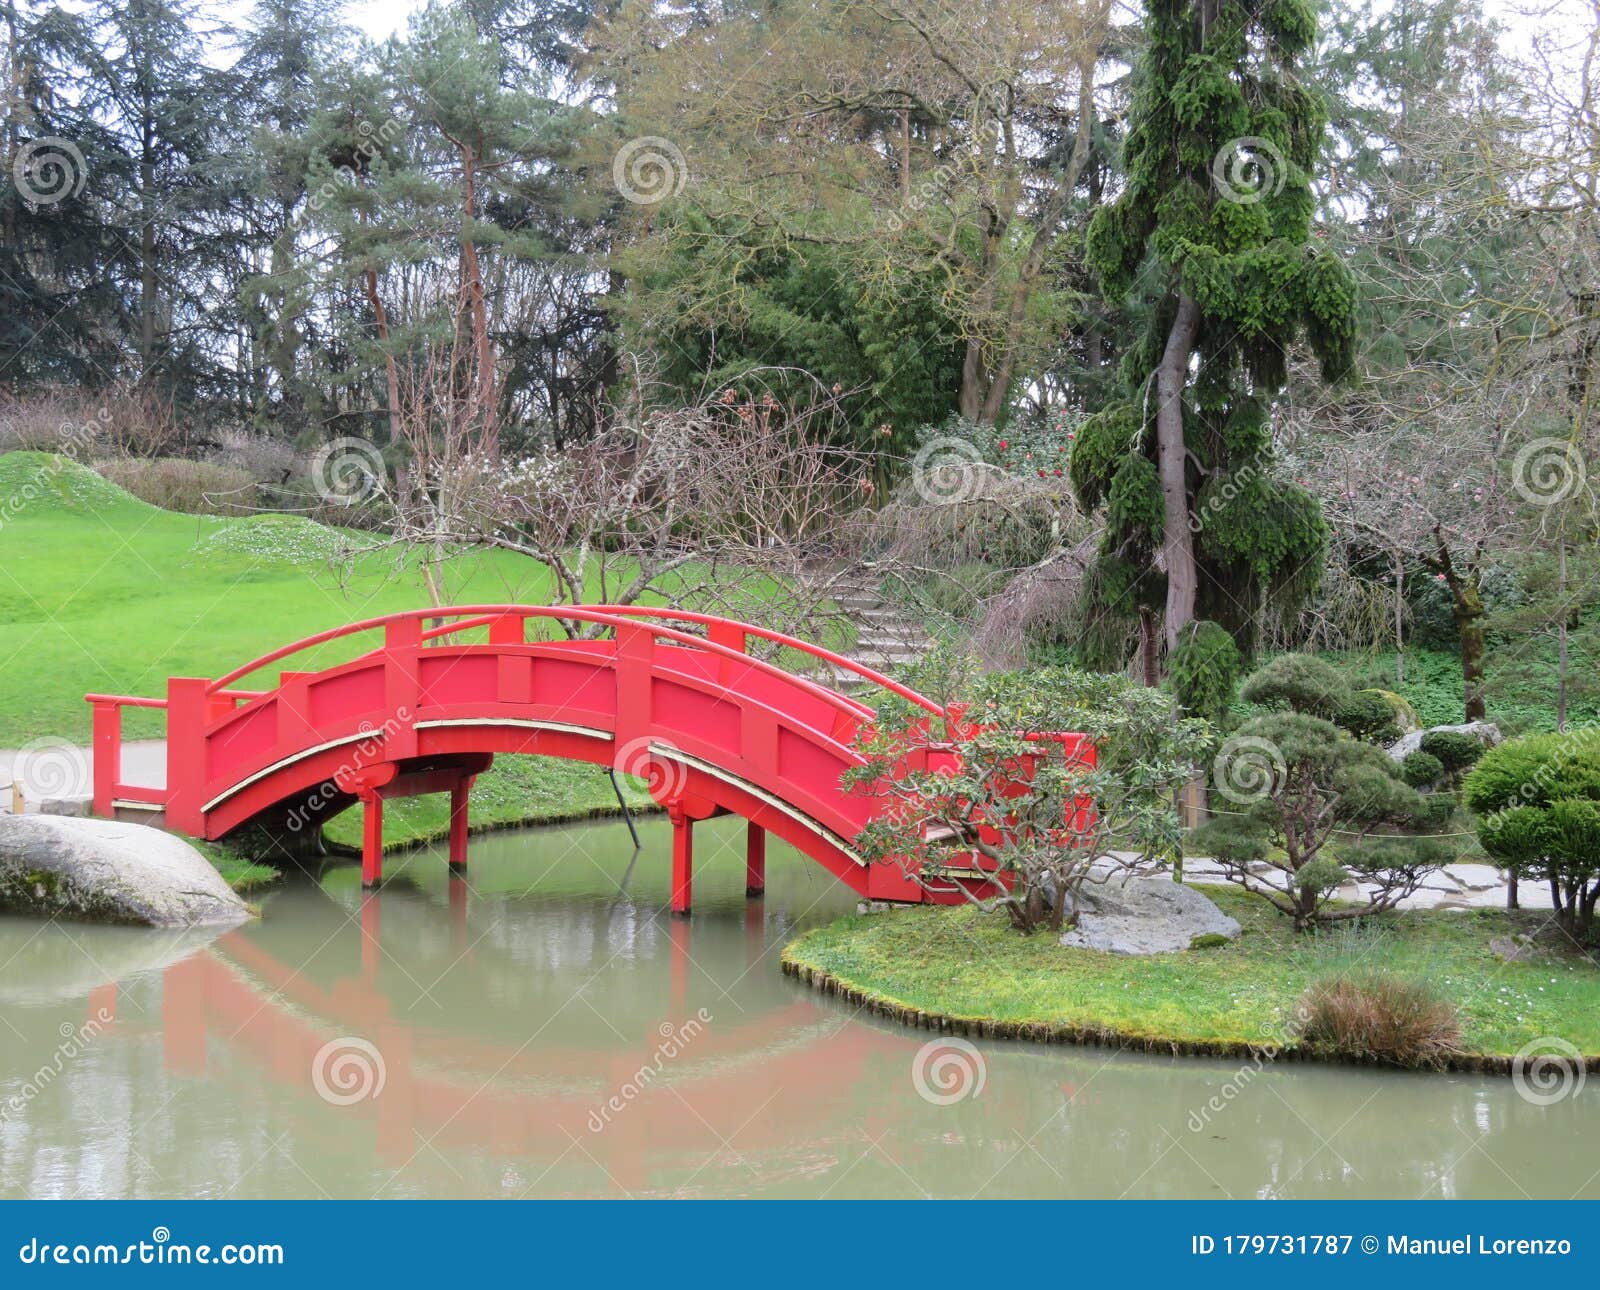 beautiful japanese garden in the city of toulouse with lake and bridge